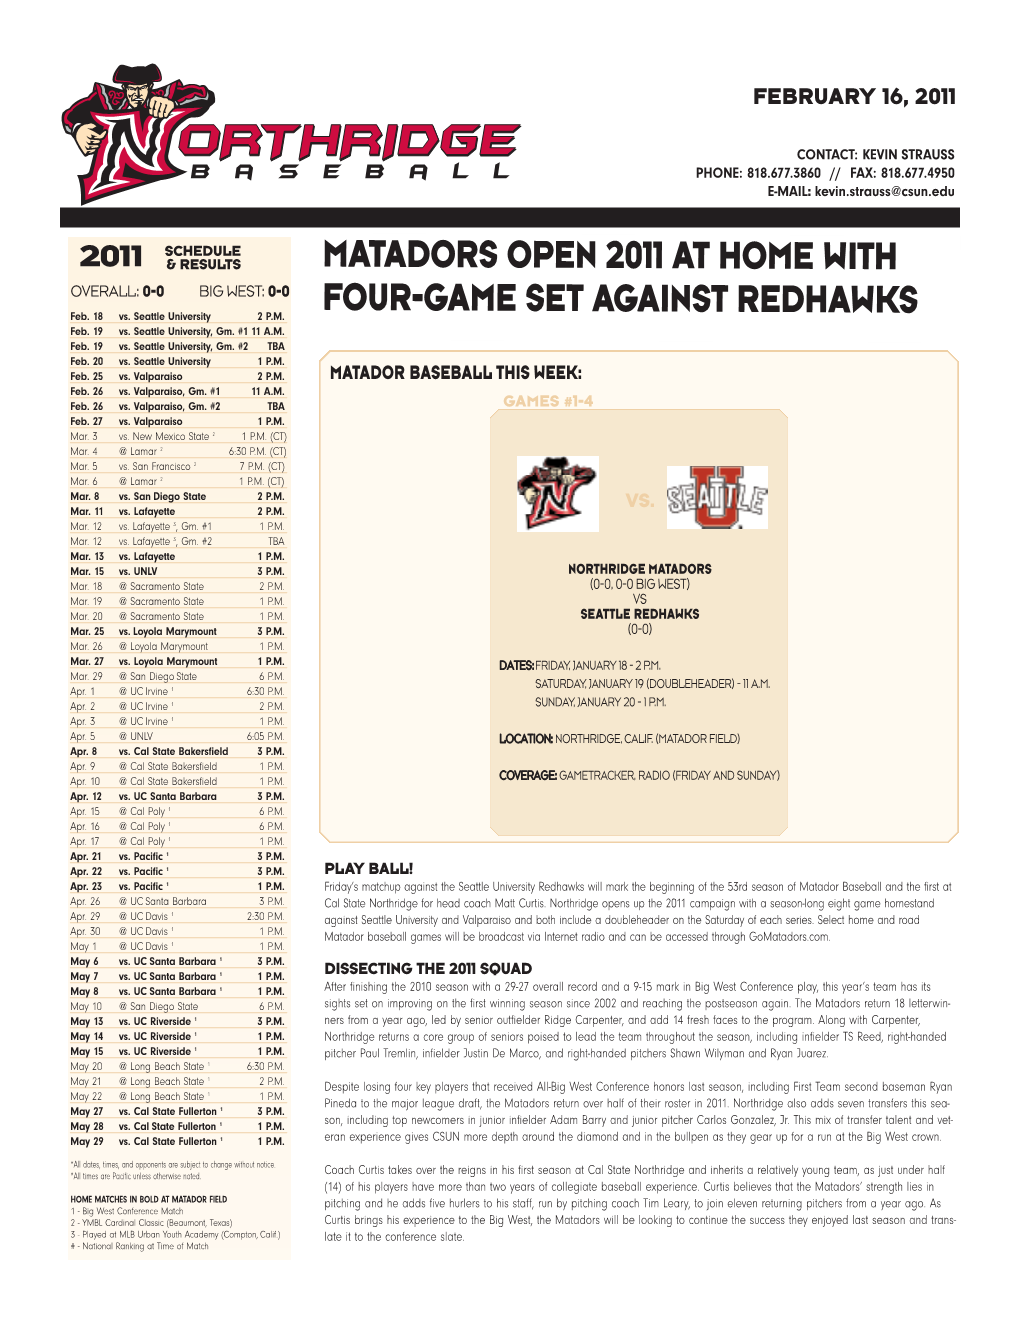 Matadors Open 2011 at Home with Four-Game Set Against Redhawks